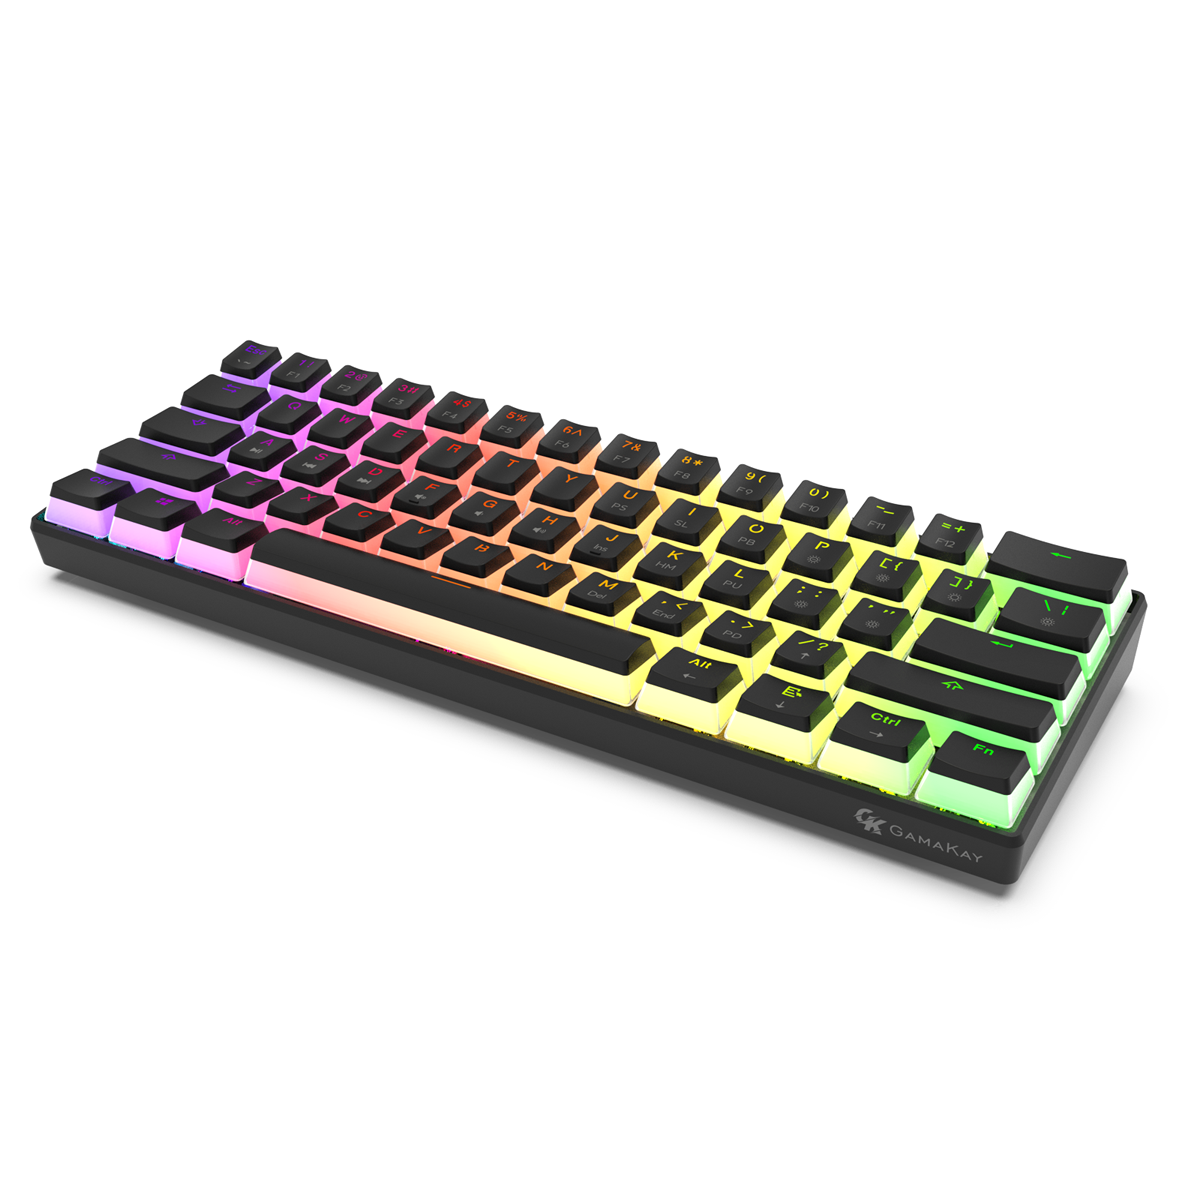 Gamakay MK61 Wired Mechanical Keyboard Gateron Optical Switch Pudding Keycaps RGB 61 Keys Hot Swappable Gaming Keyboard New Version 2